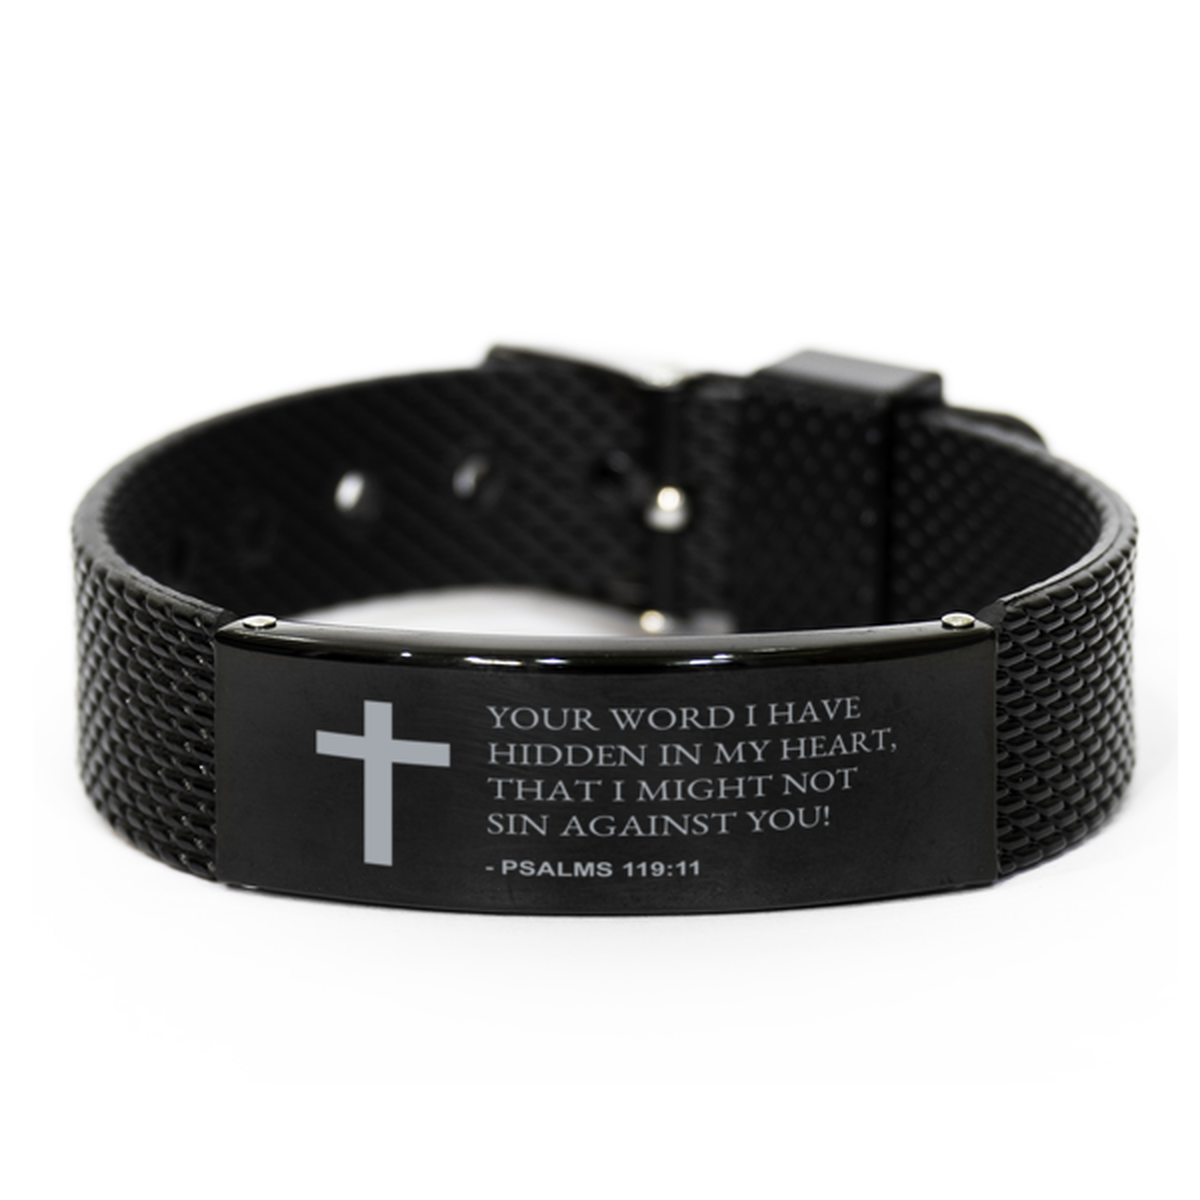 Christian Black Bracelet,, Psalms 119:11 Your Word I Have Hidden In My Heart, That I Might, Motivational Bible Verse Gifts For Men Women